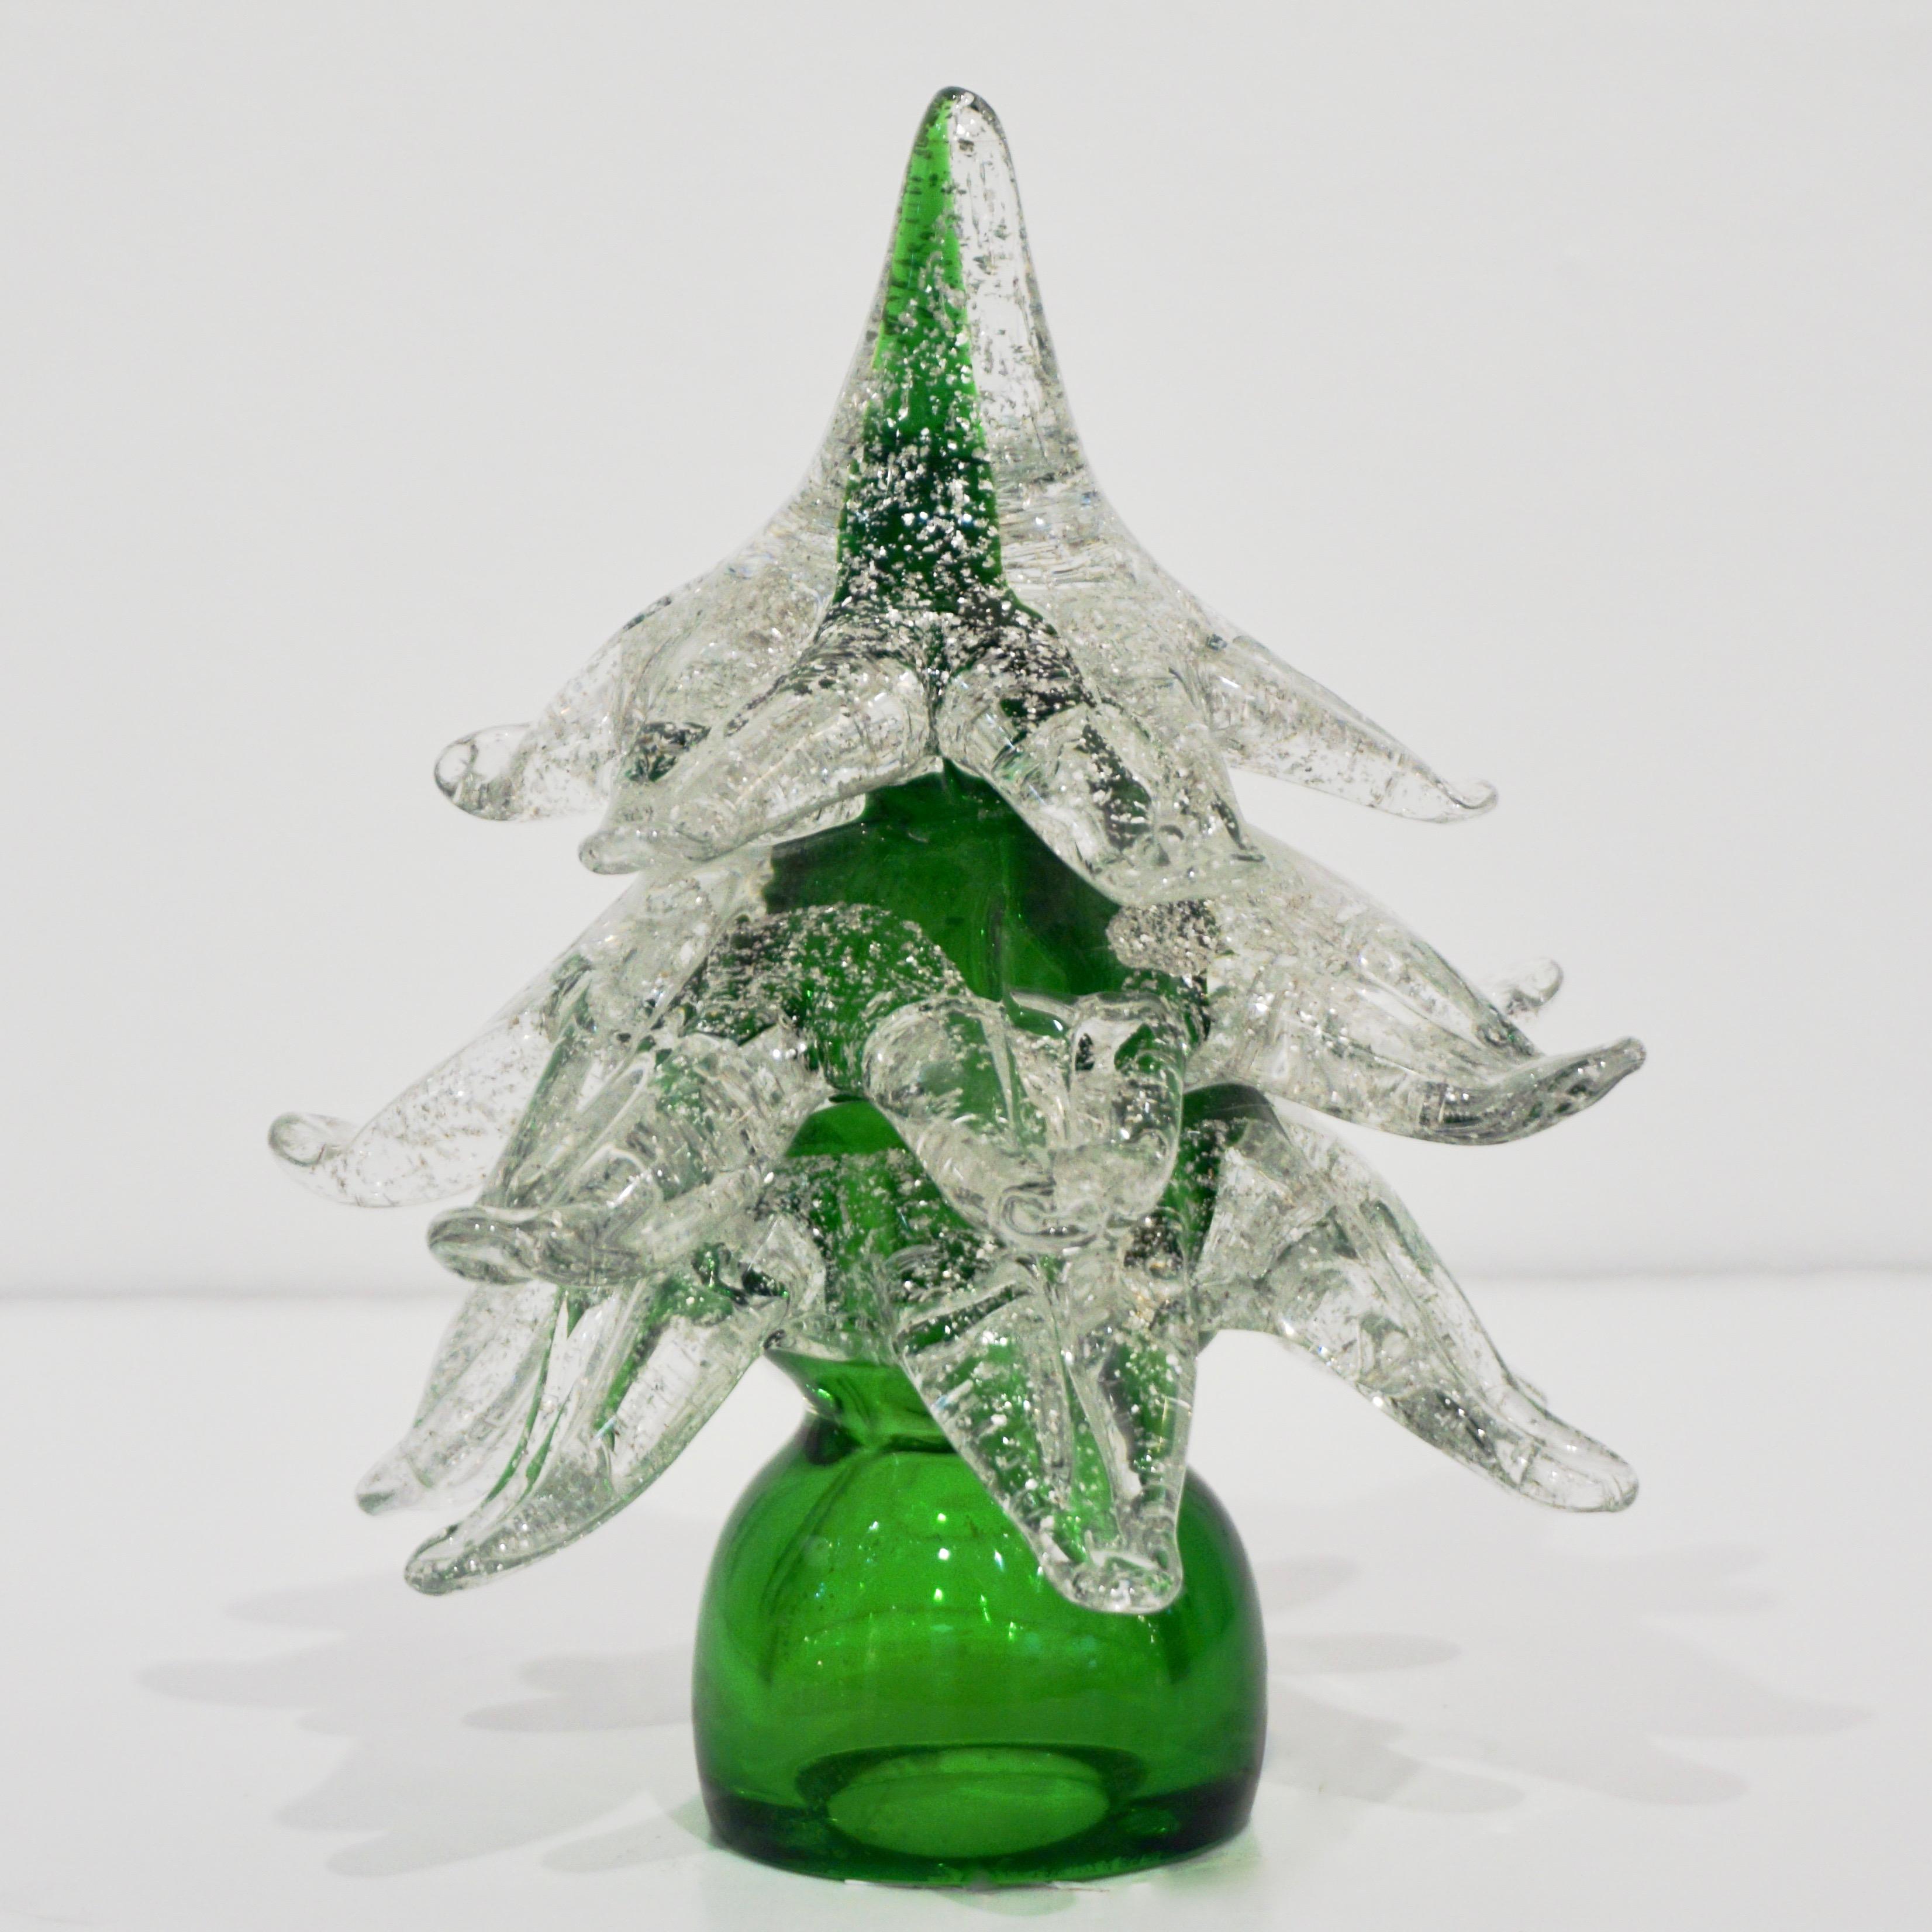 Hand-Crafted Formia Italian Vintage Green and Silver Murano Glass Christmas Tree Sculpture